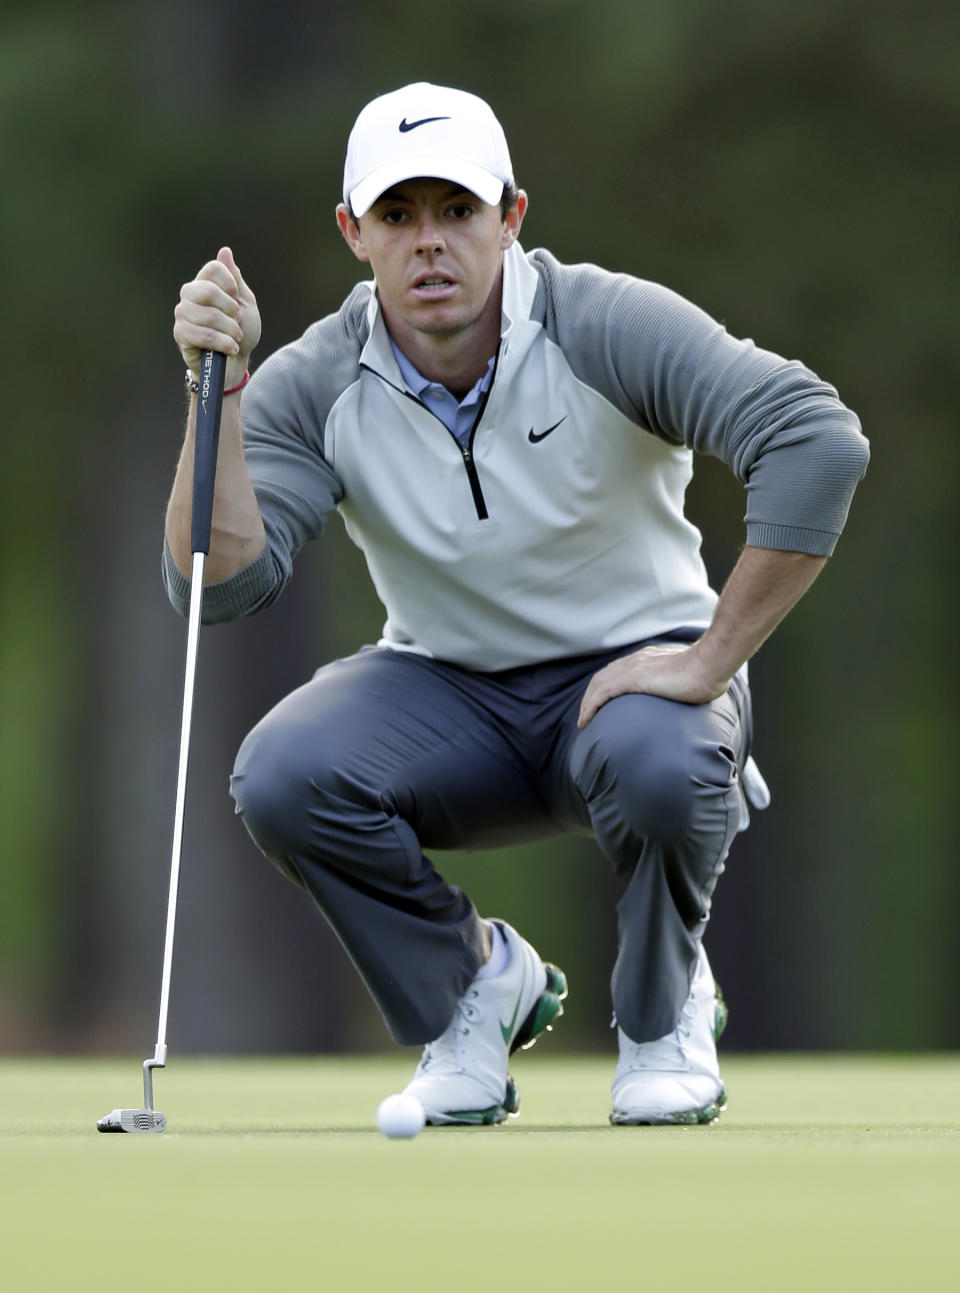 Rory McIlroy lines up a putt on the 11th hole during the first round of the Wells Fargo Championship golf tournament in Charlotte, N.C., Thursday, May 1, 2014. (AP Photo/Chuck Burton)